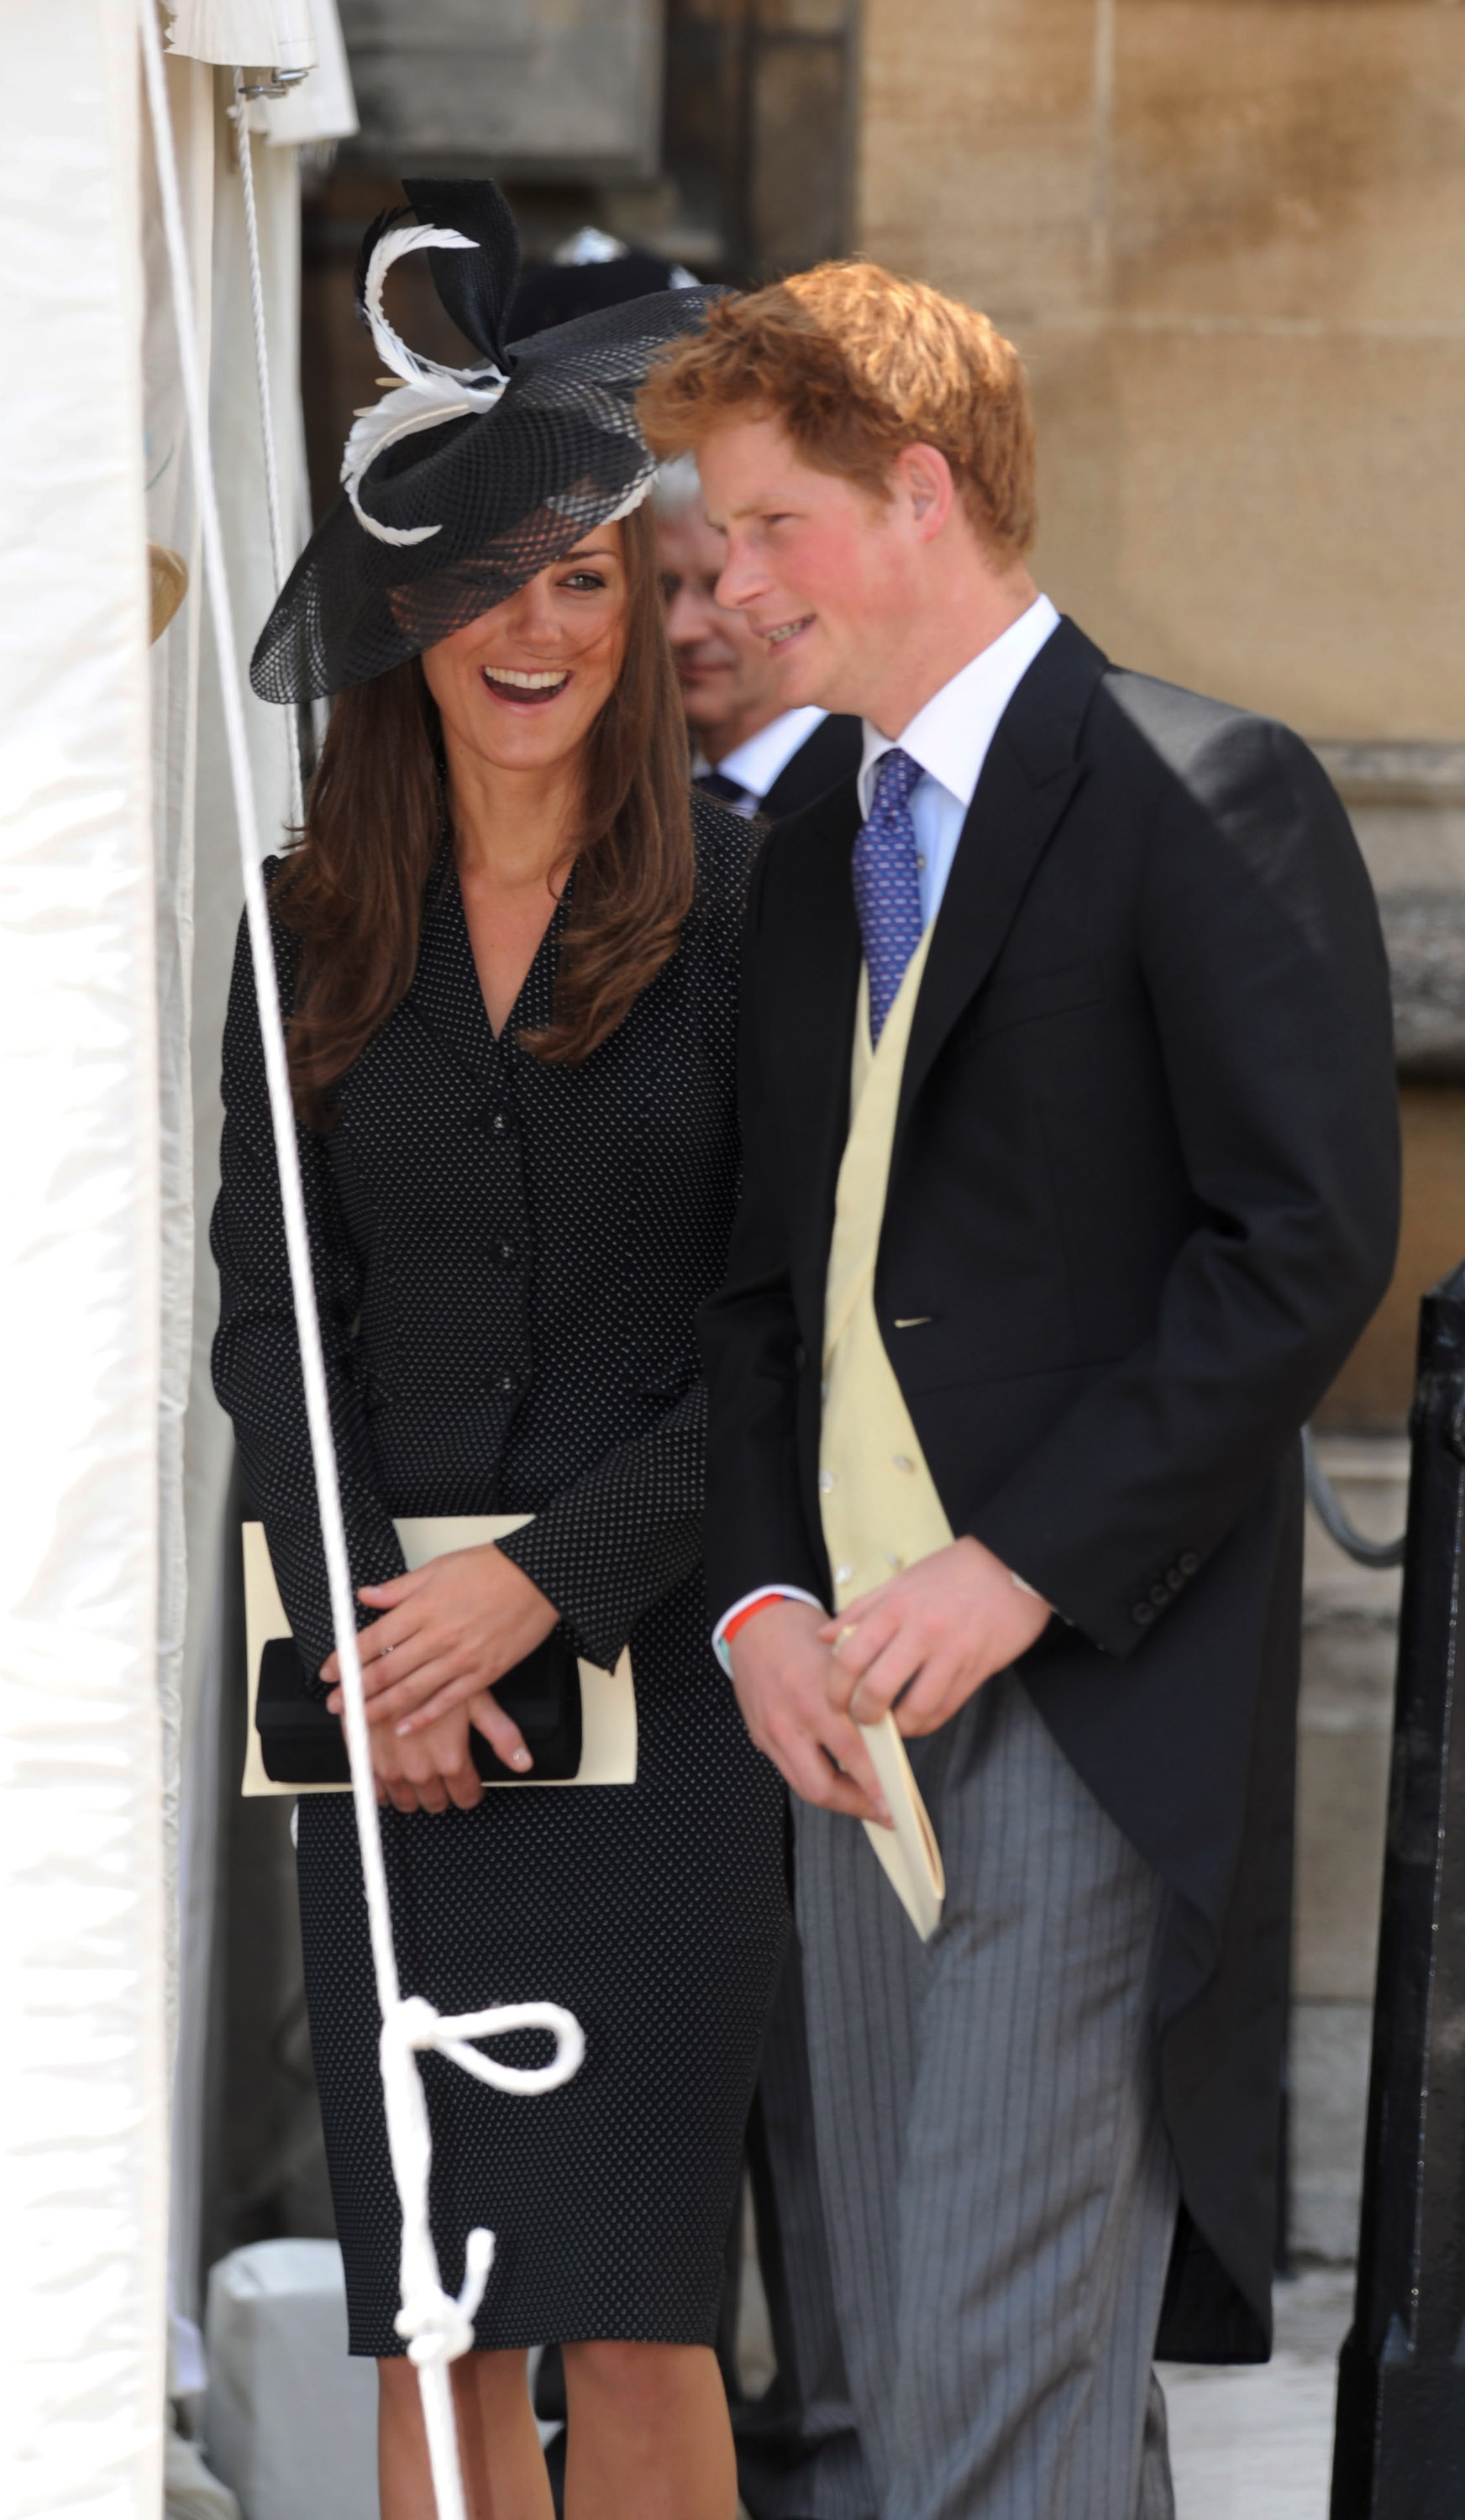 Prince Harry and Kate Middleton laughing at the Order of the Garter procession on June 16, 2008, in Windsor. | Source: Getty Images